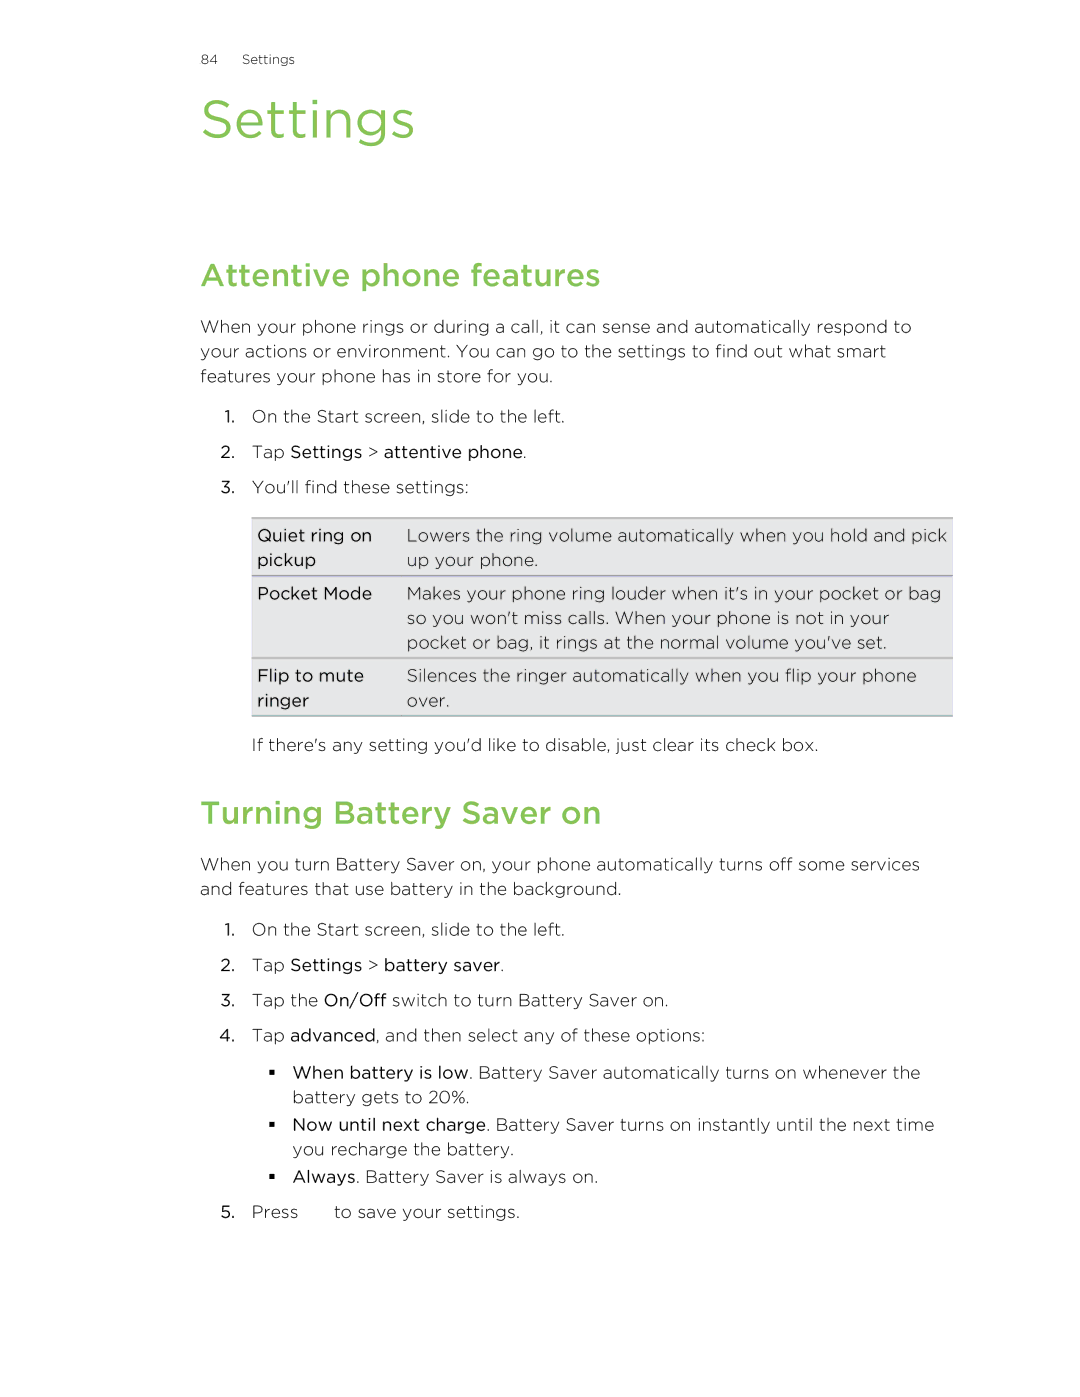 HTC 8X manual Settings, Attentive phone features, Turning Battery Saver on 